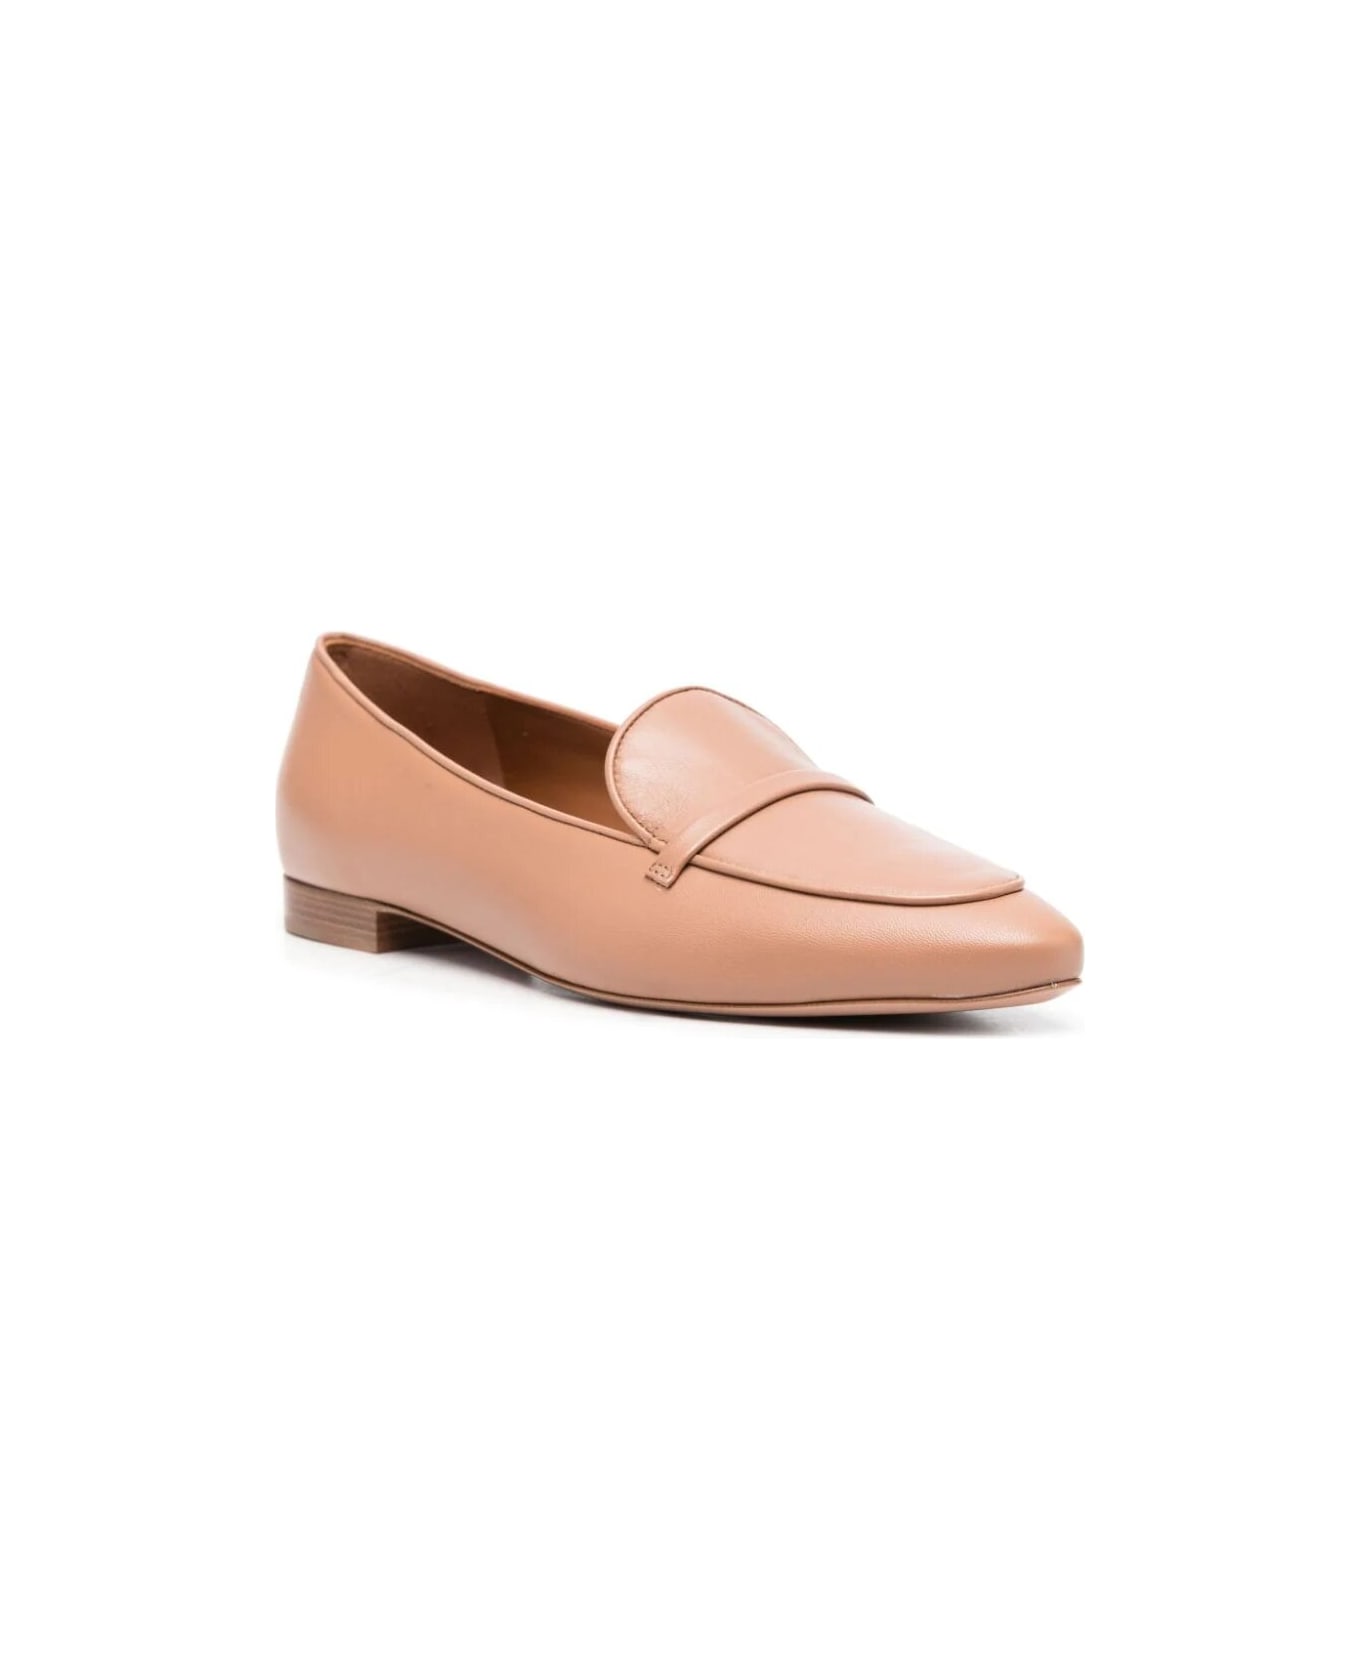 Malone Souliers Mocassino In Nappa - Nude フラットシューズ